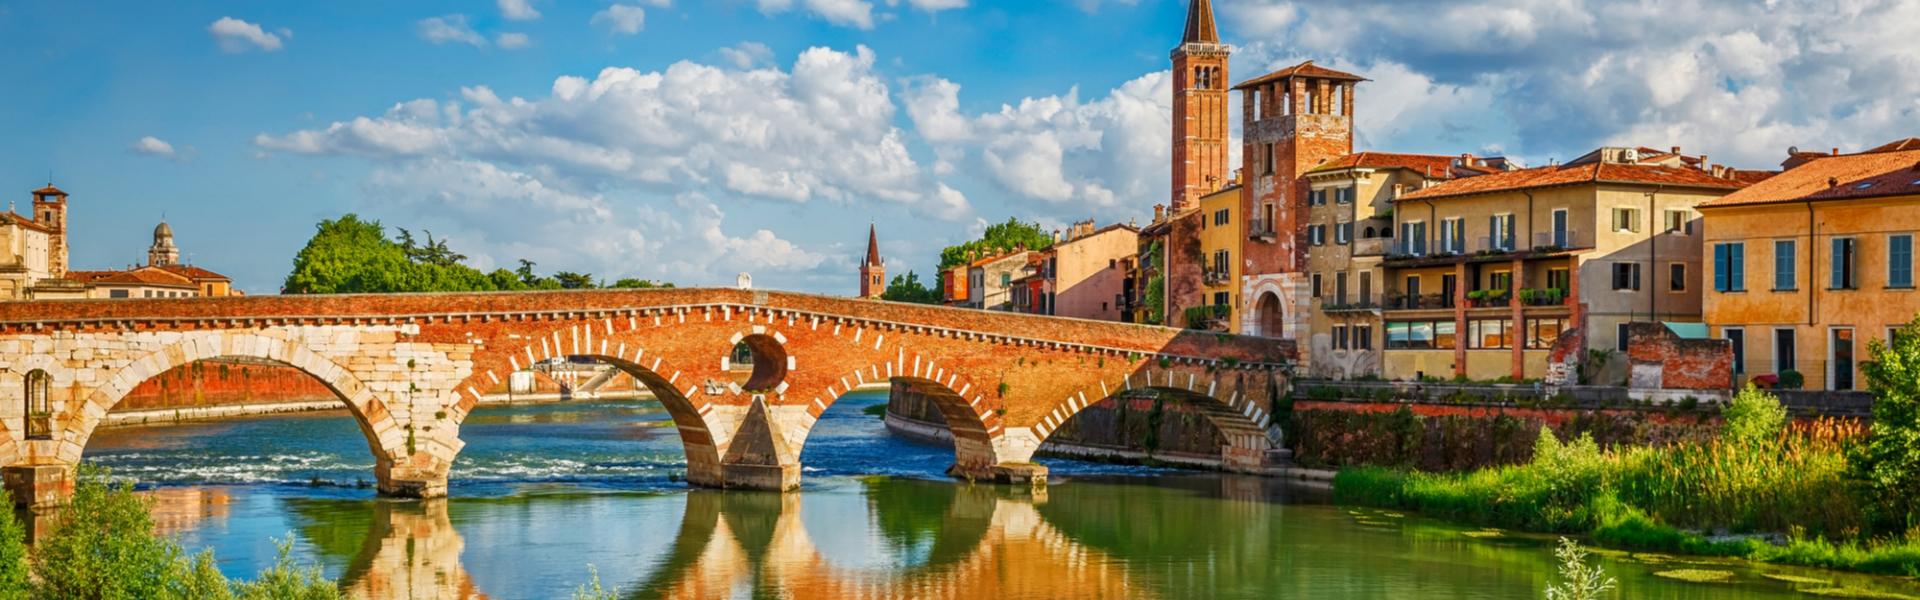 Find the perfect vacation home in Verona - Casamundo